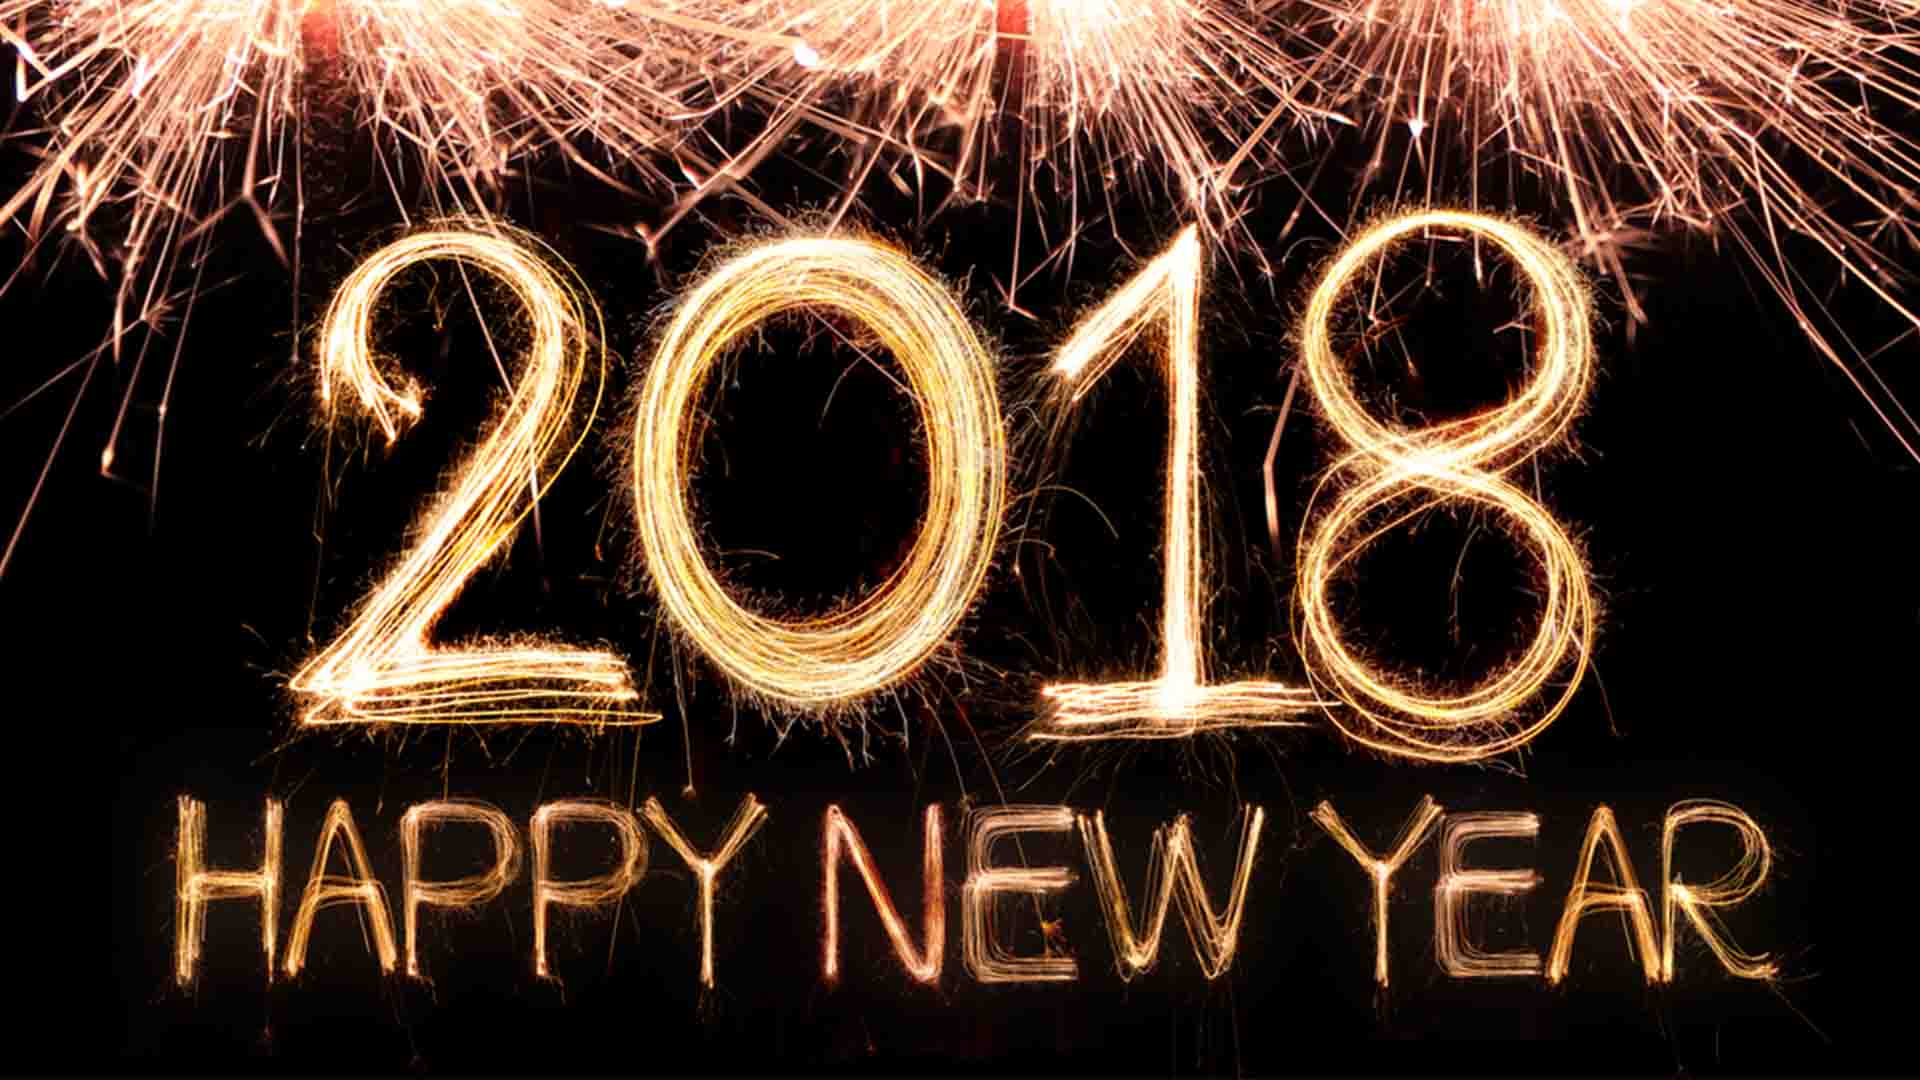 Happy New Year 2018 images